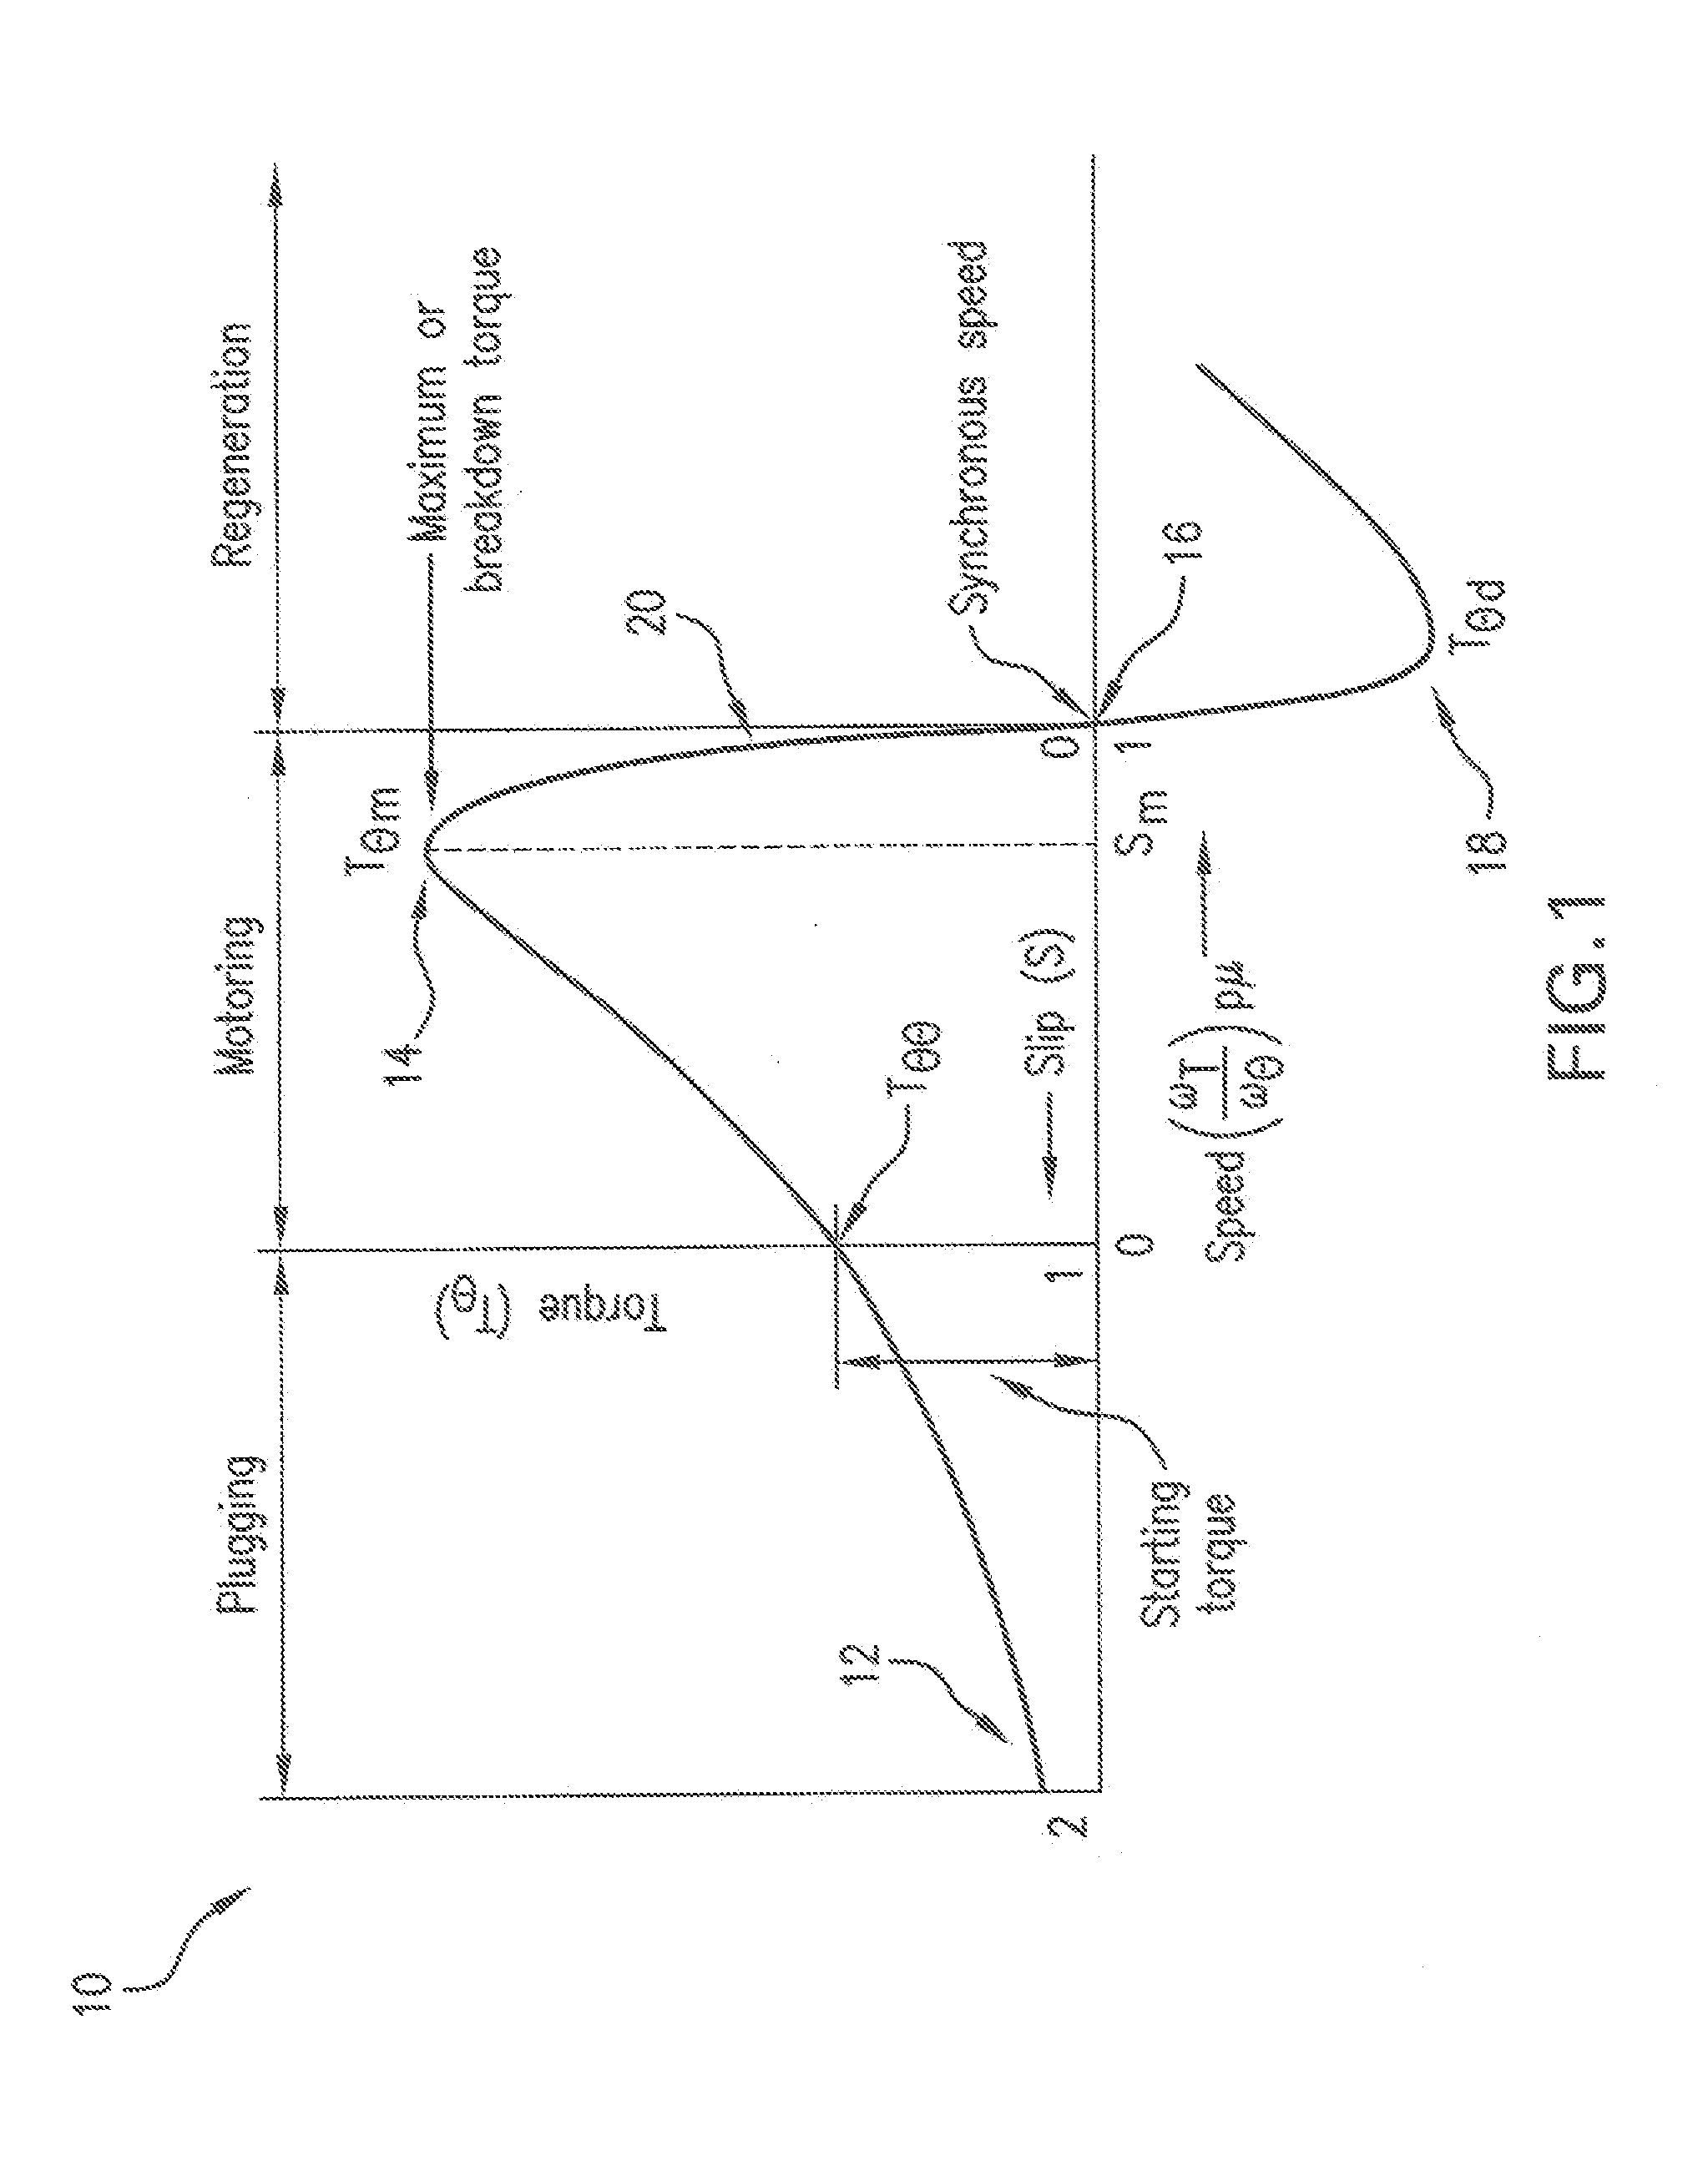 Electric vehicle traction control system and method